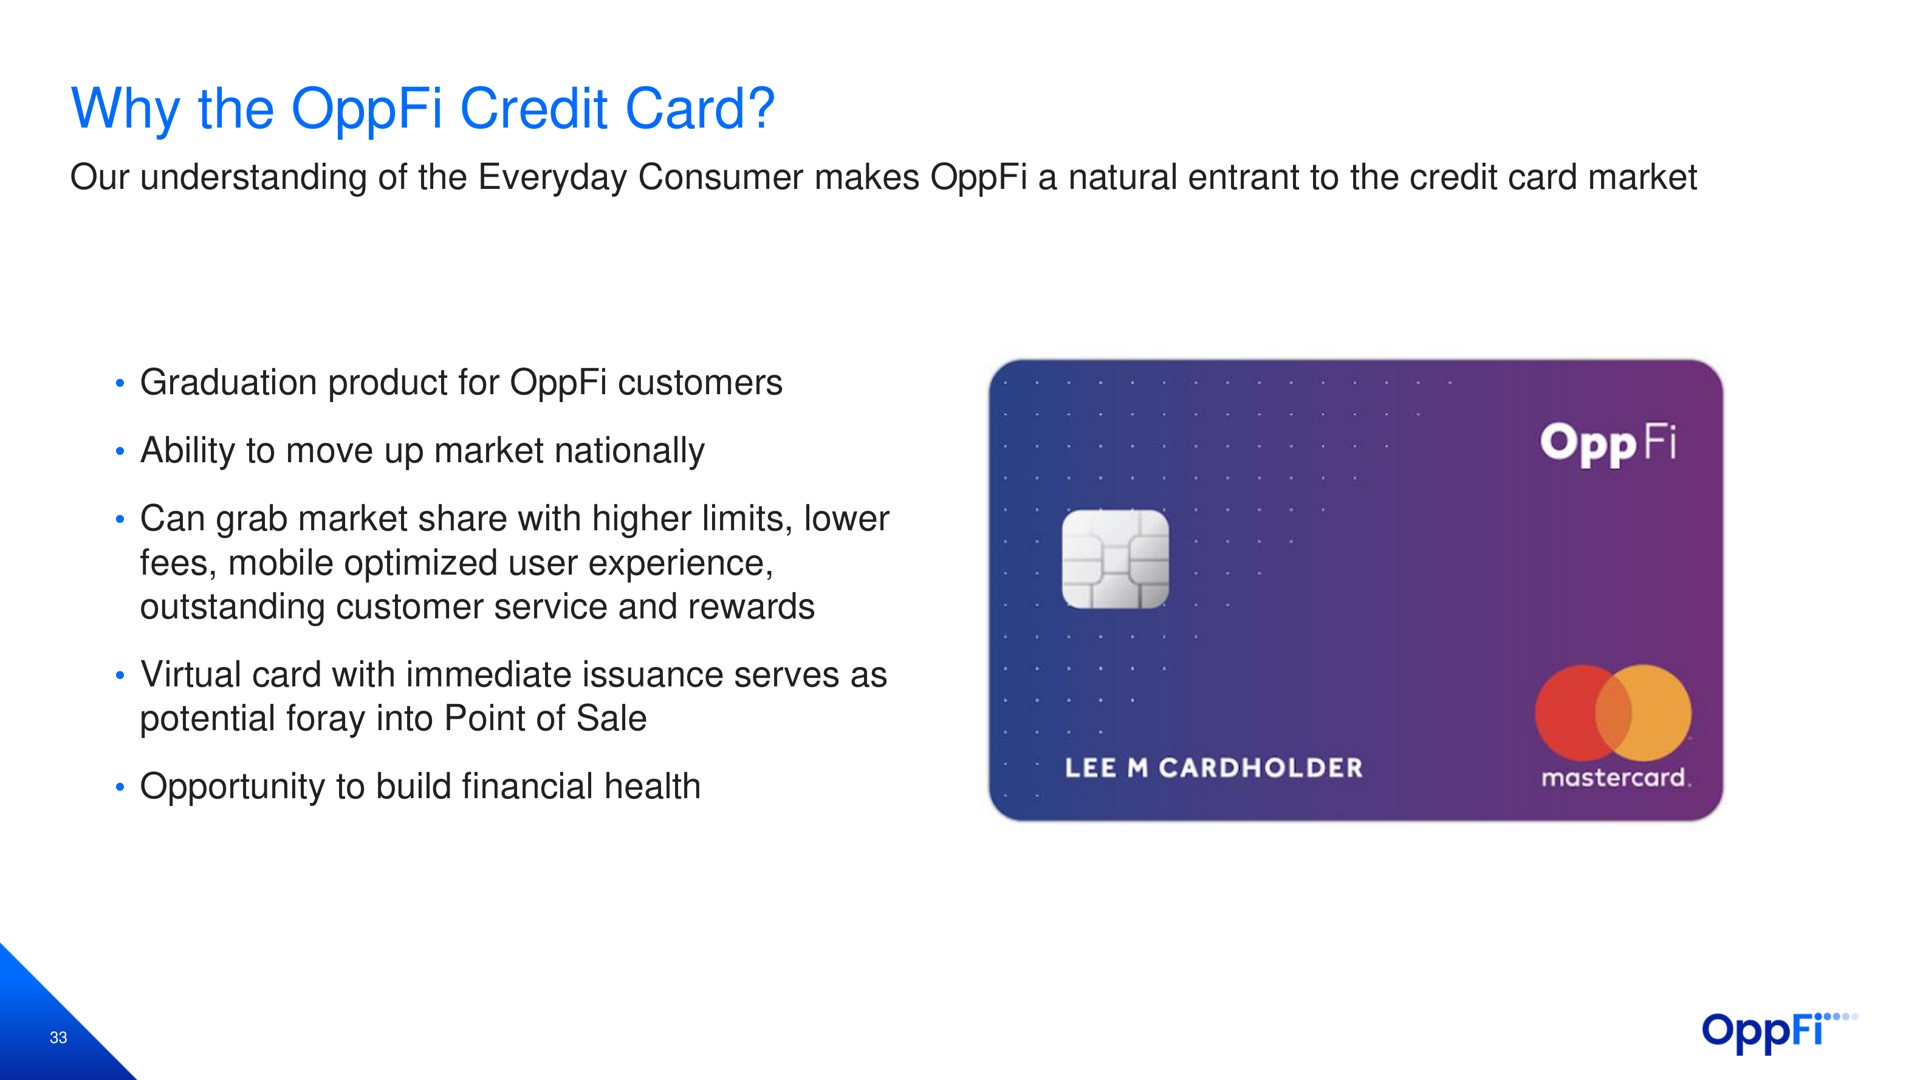 why the credit card our understanding of the everyday consumer makes a natural entrant to the credit card market graduation product for customers ability to move up market nationally can grab market share with higher limits lower fees mobile optimized user experience outstanding customer service and rewards virtual card with immediate issuance serves as potential foray into point of sale opportunity to build financial health | OppFi